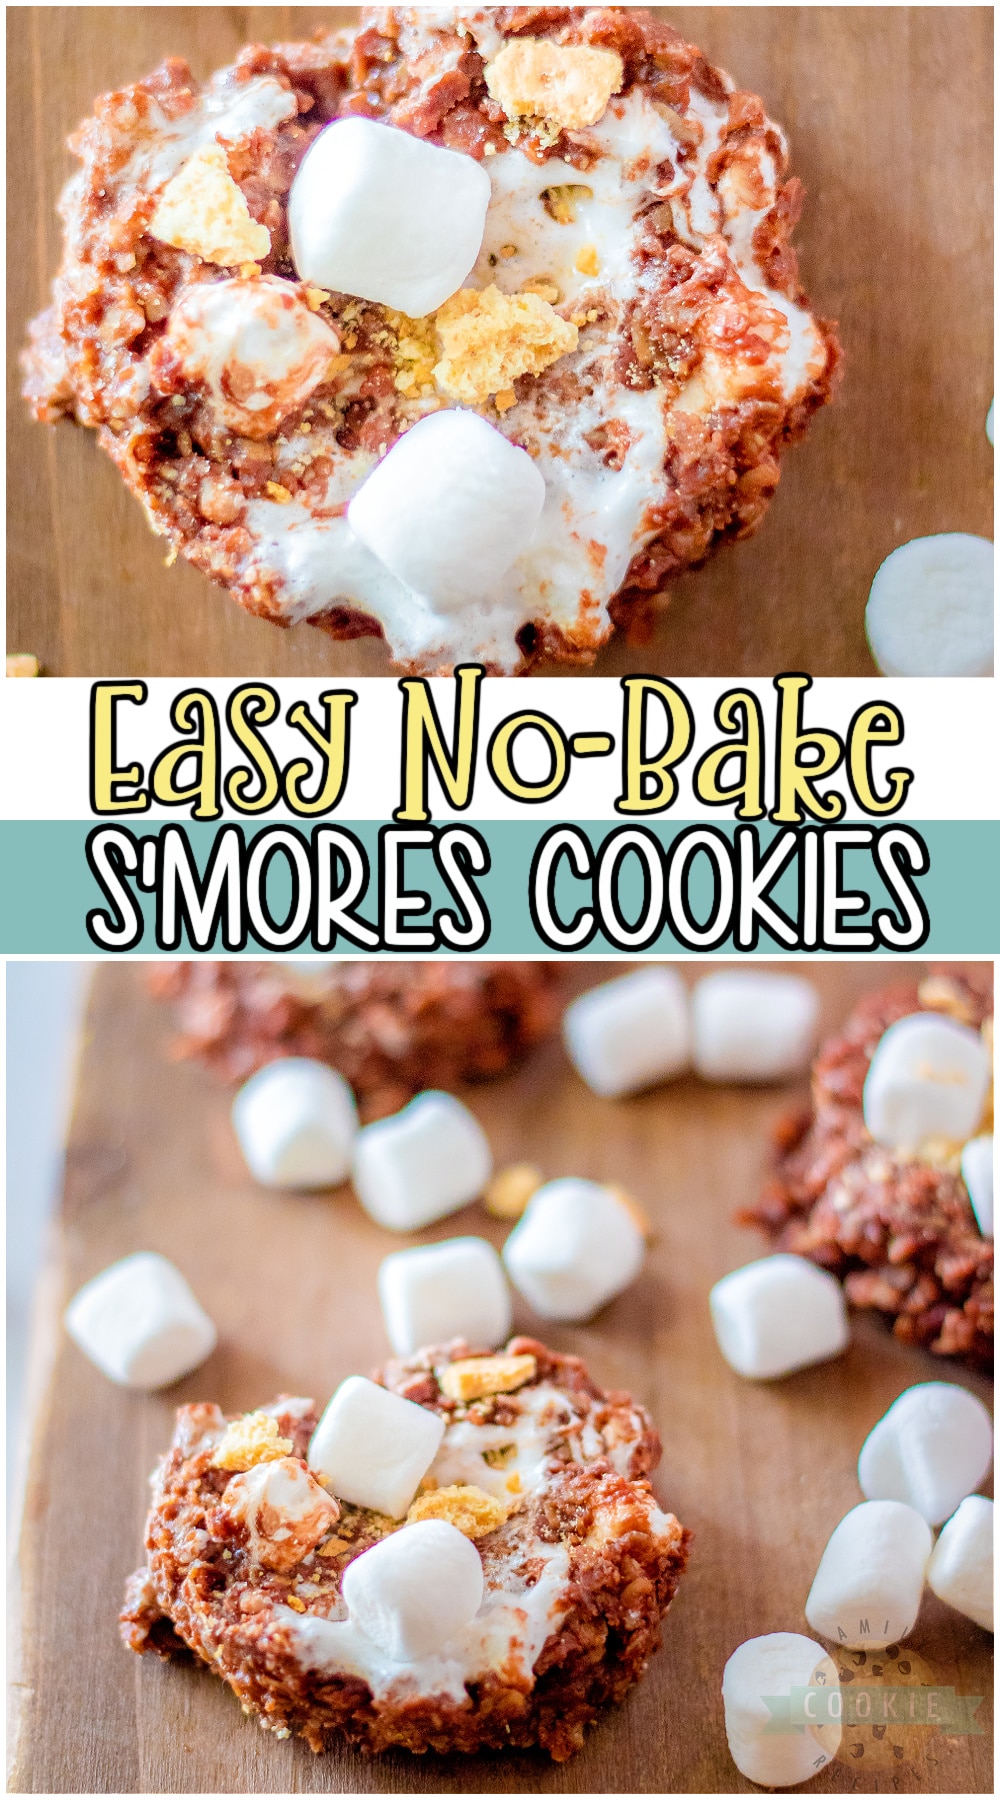 No-Bake S'mores Cookies made with oats, peanut butter, marshmallows & graham crackers! Simple recipe for s'mores fans that's a fun twist on classic no-bake cookies. #nobake #cookies #smores #chocolate #oats #easyrecipe from FAMILY COOKIE RECIPES via @buttergirls